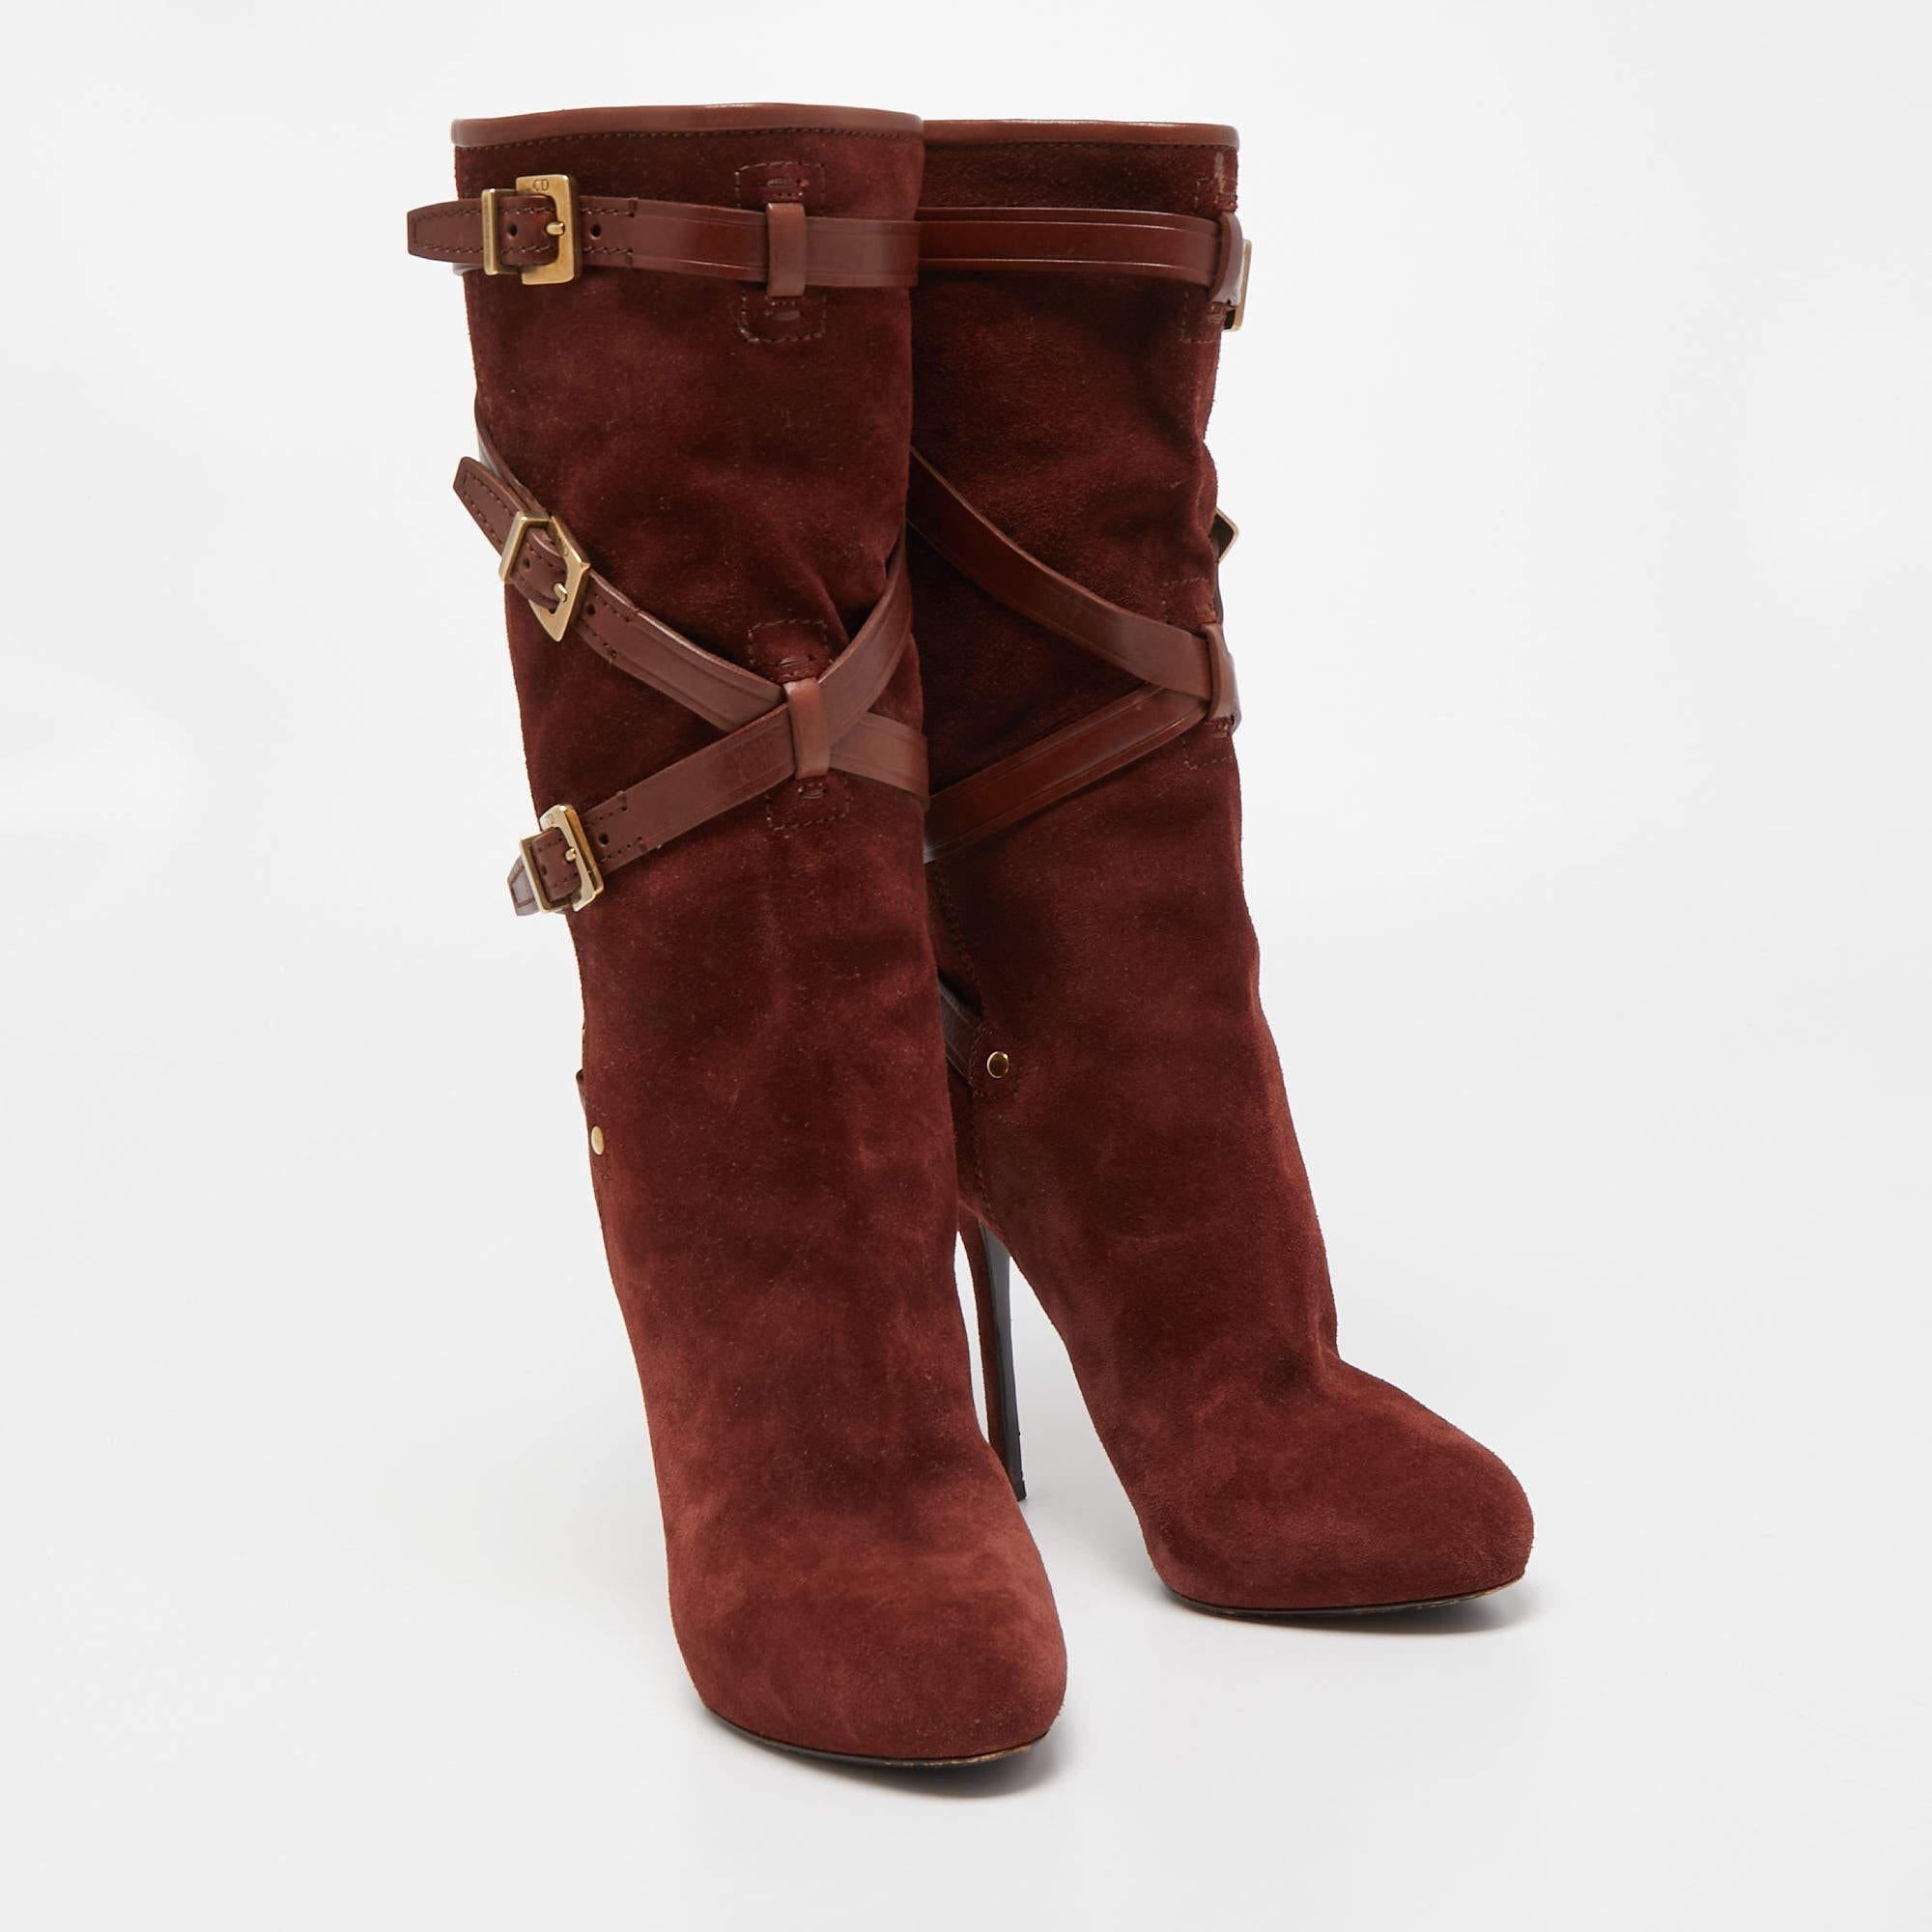 Boots are an essential part of your wardrobe, and these boots, crafted from top-quality materials, are a fine choice. Offering the best of comfort and style, this sturdy-soled pair would be great with skinny jeans for a casual day